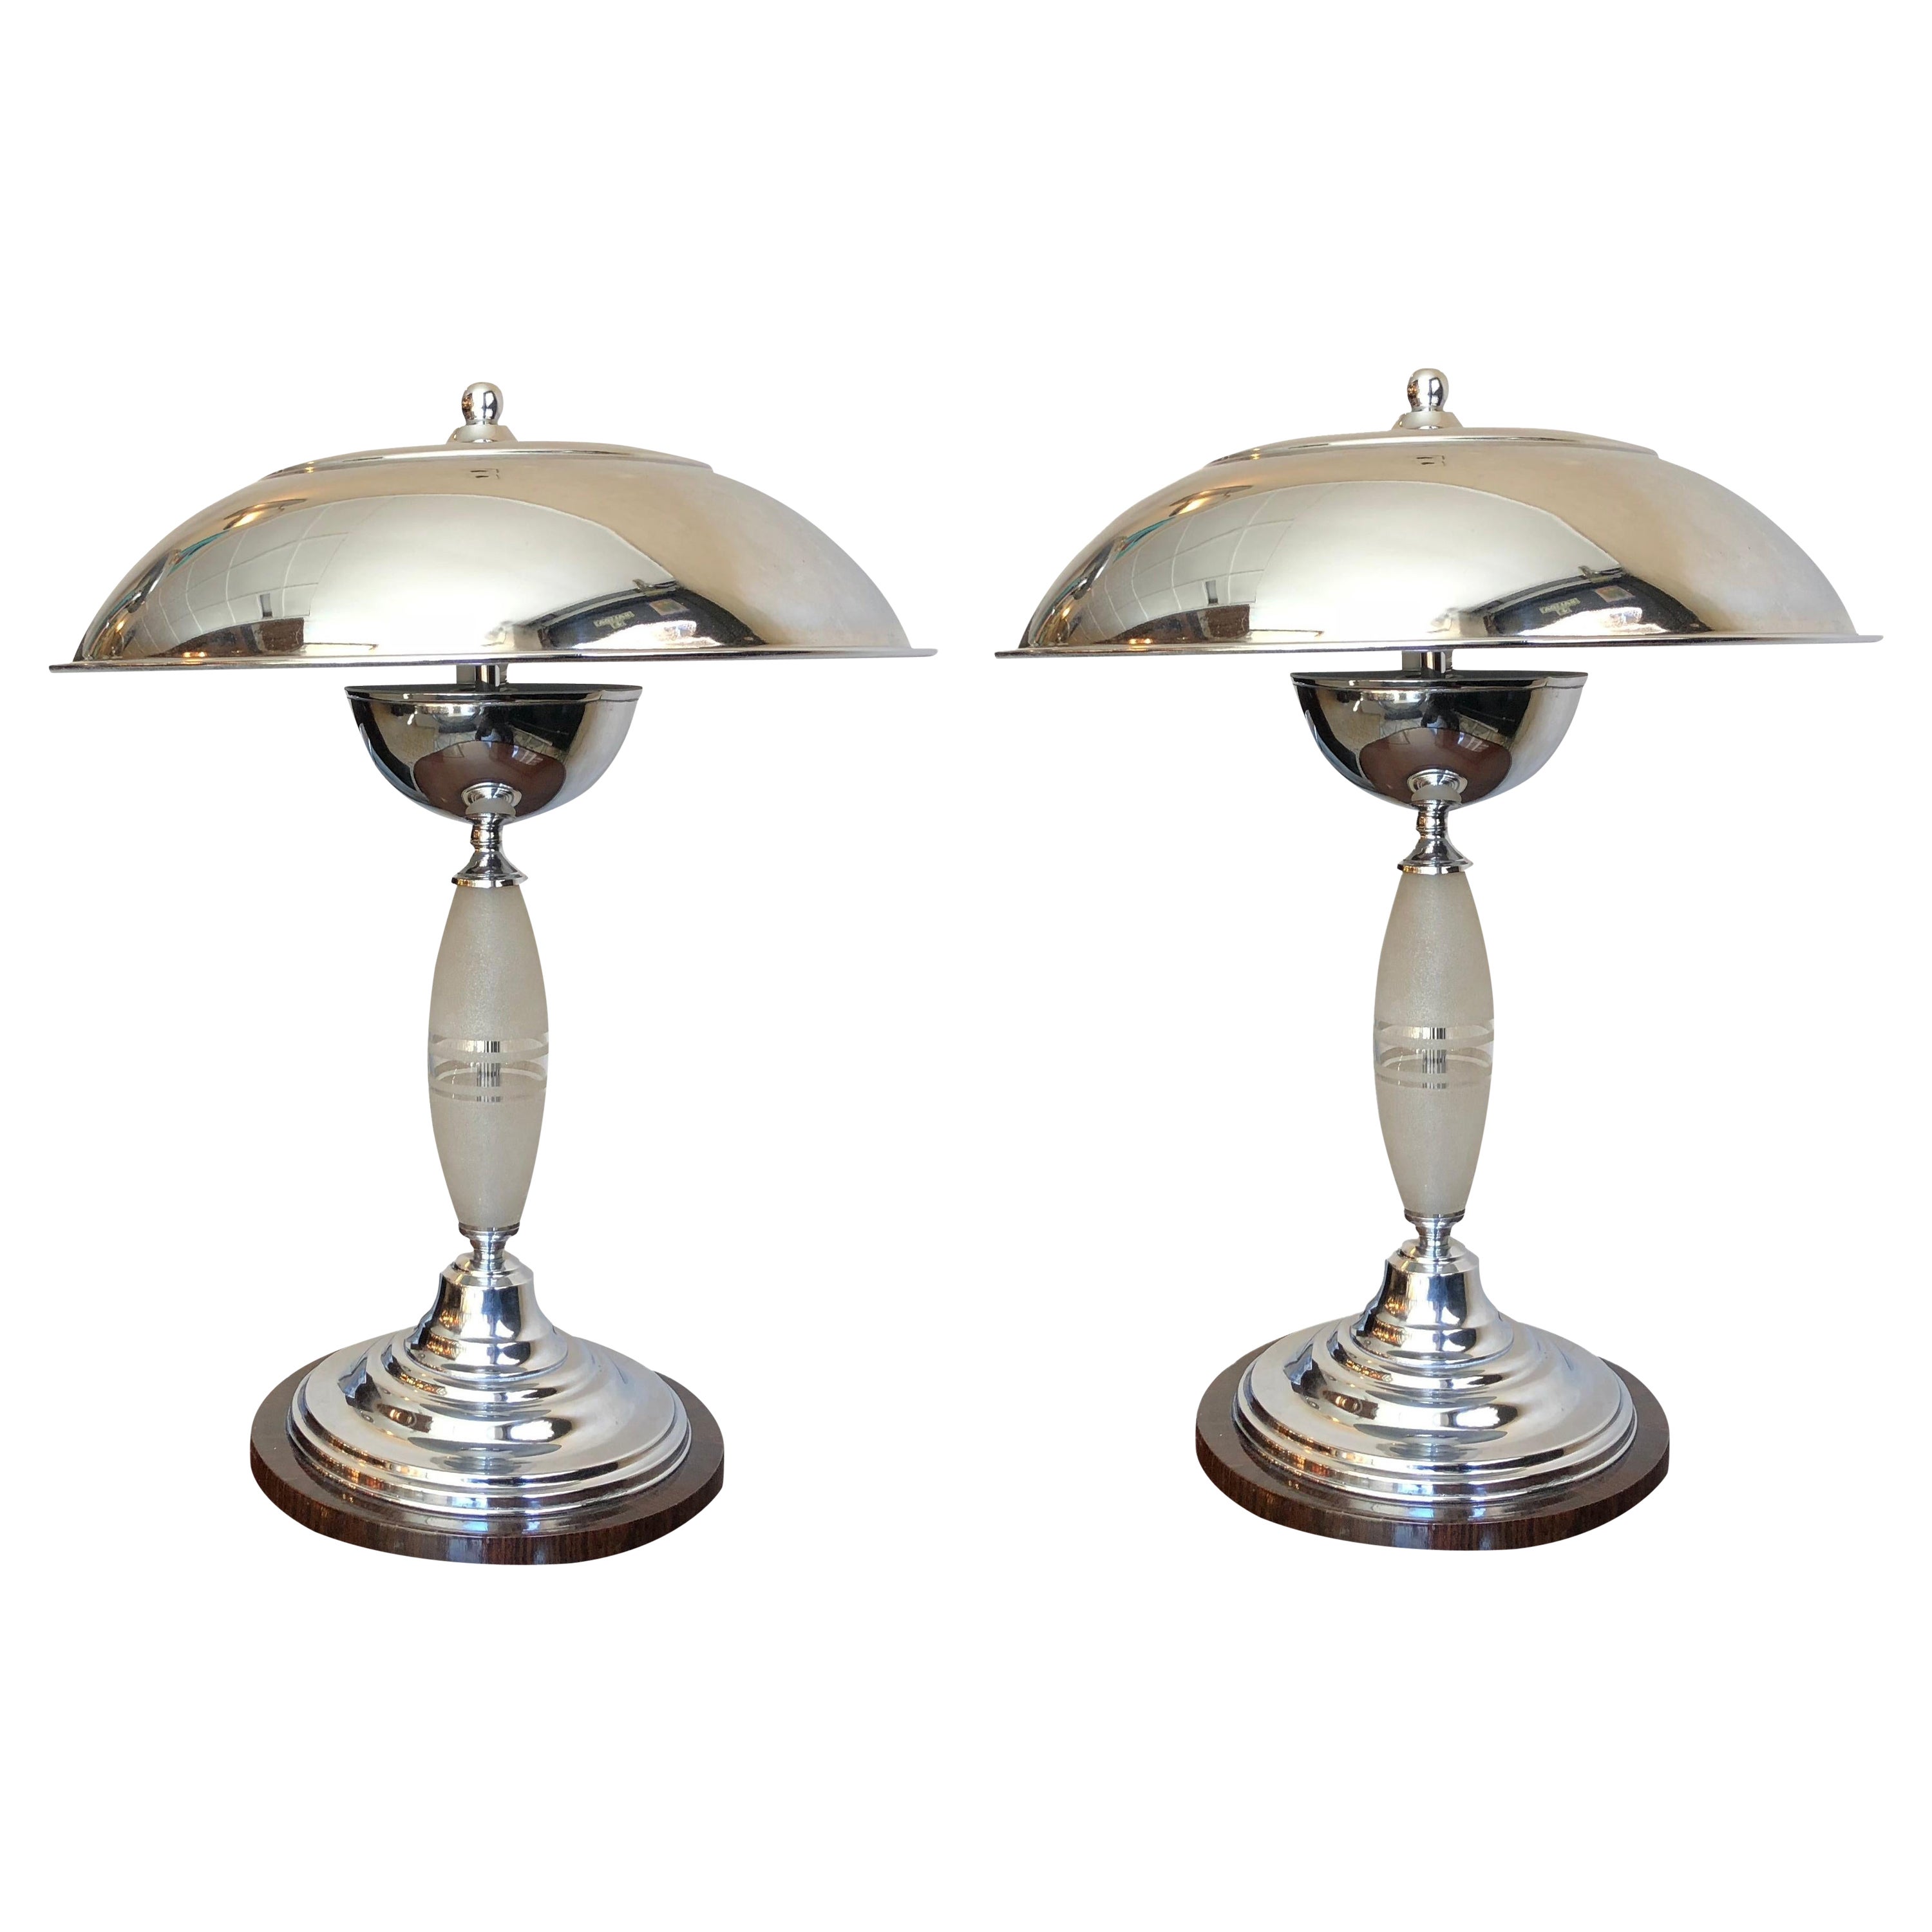 Pair of Table Lamps, Style, Art Deco, 1930, French, Material, Glass, Chrome For Sale